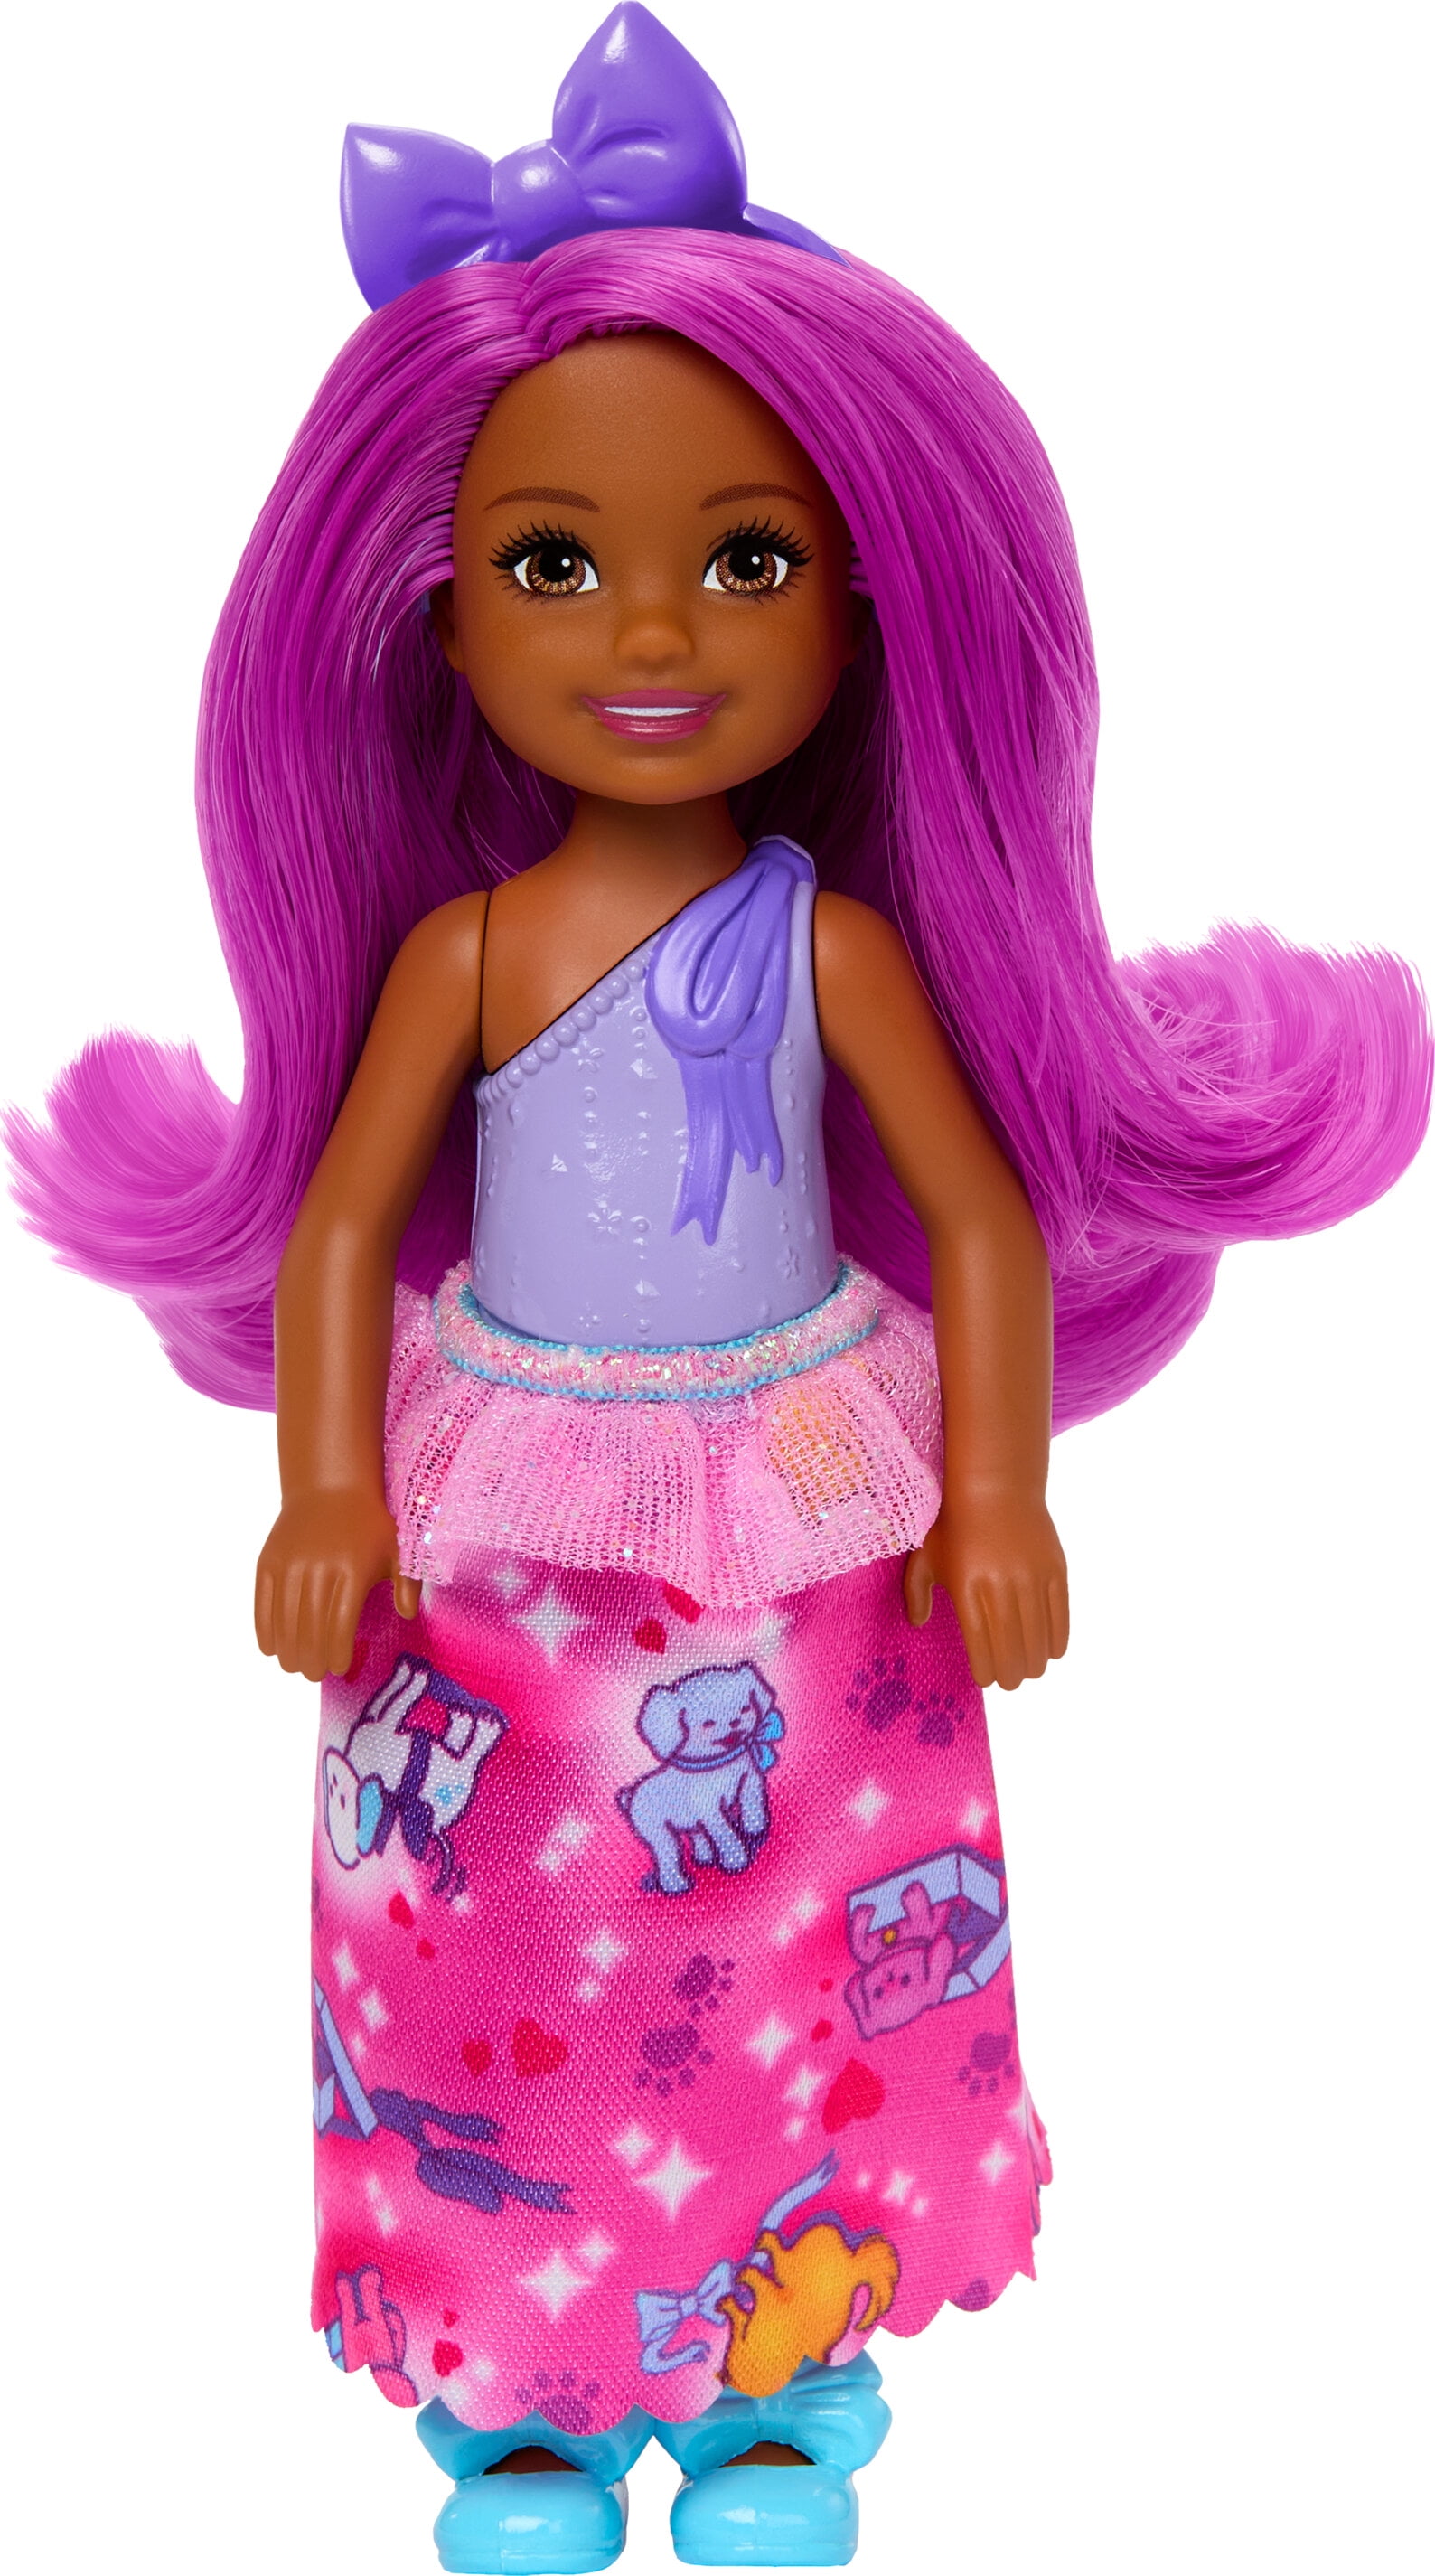 Explore Chelsea small dolls, like this adorable doll wearing a pink dress  and scoliosis brace for spine curvature. Shop Barbie dolls and gifts at  .